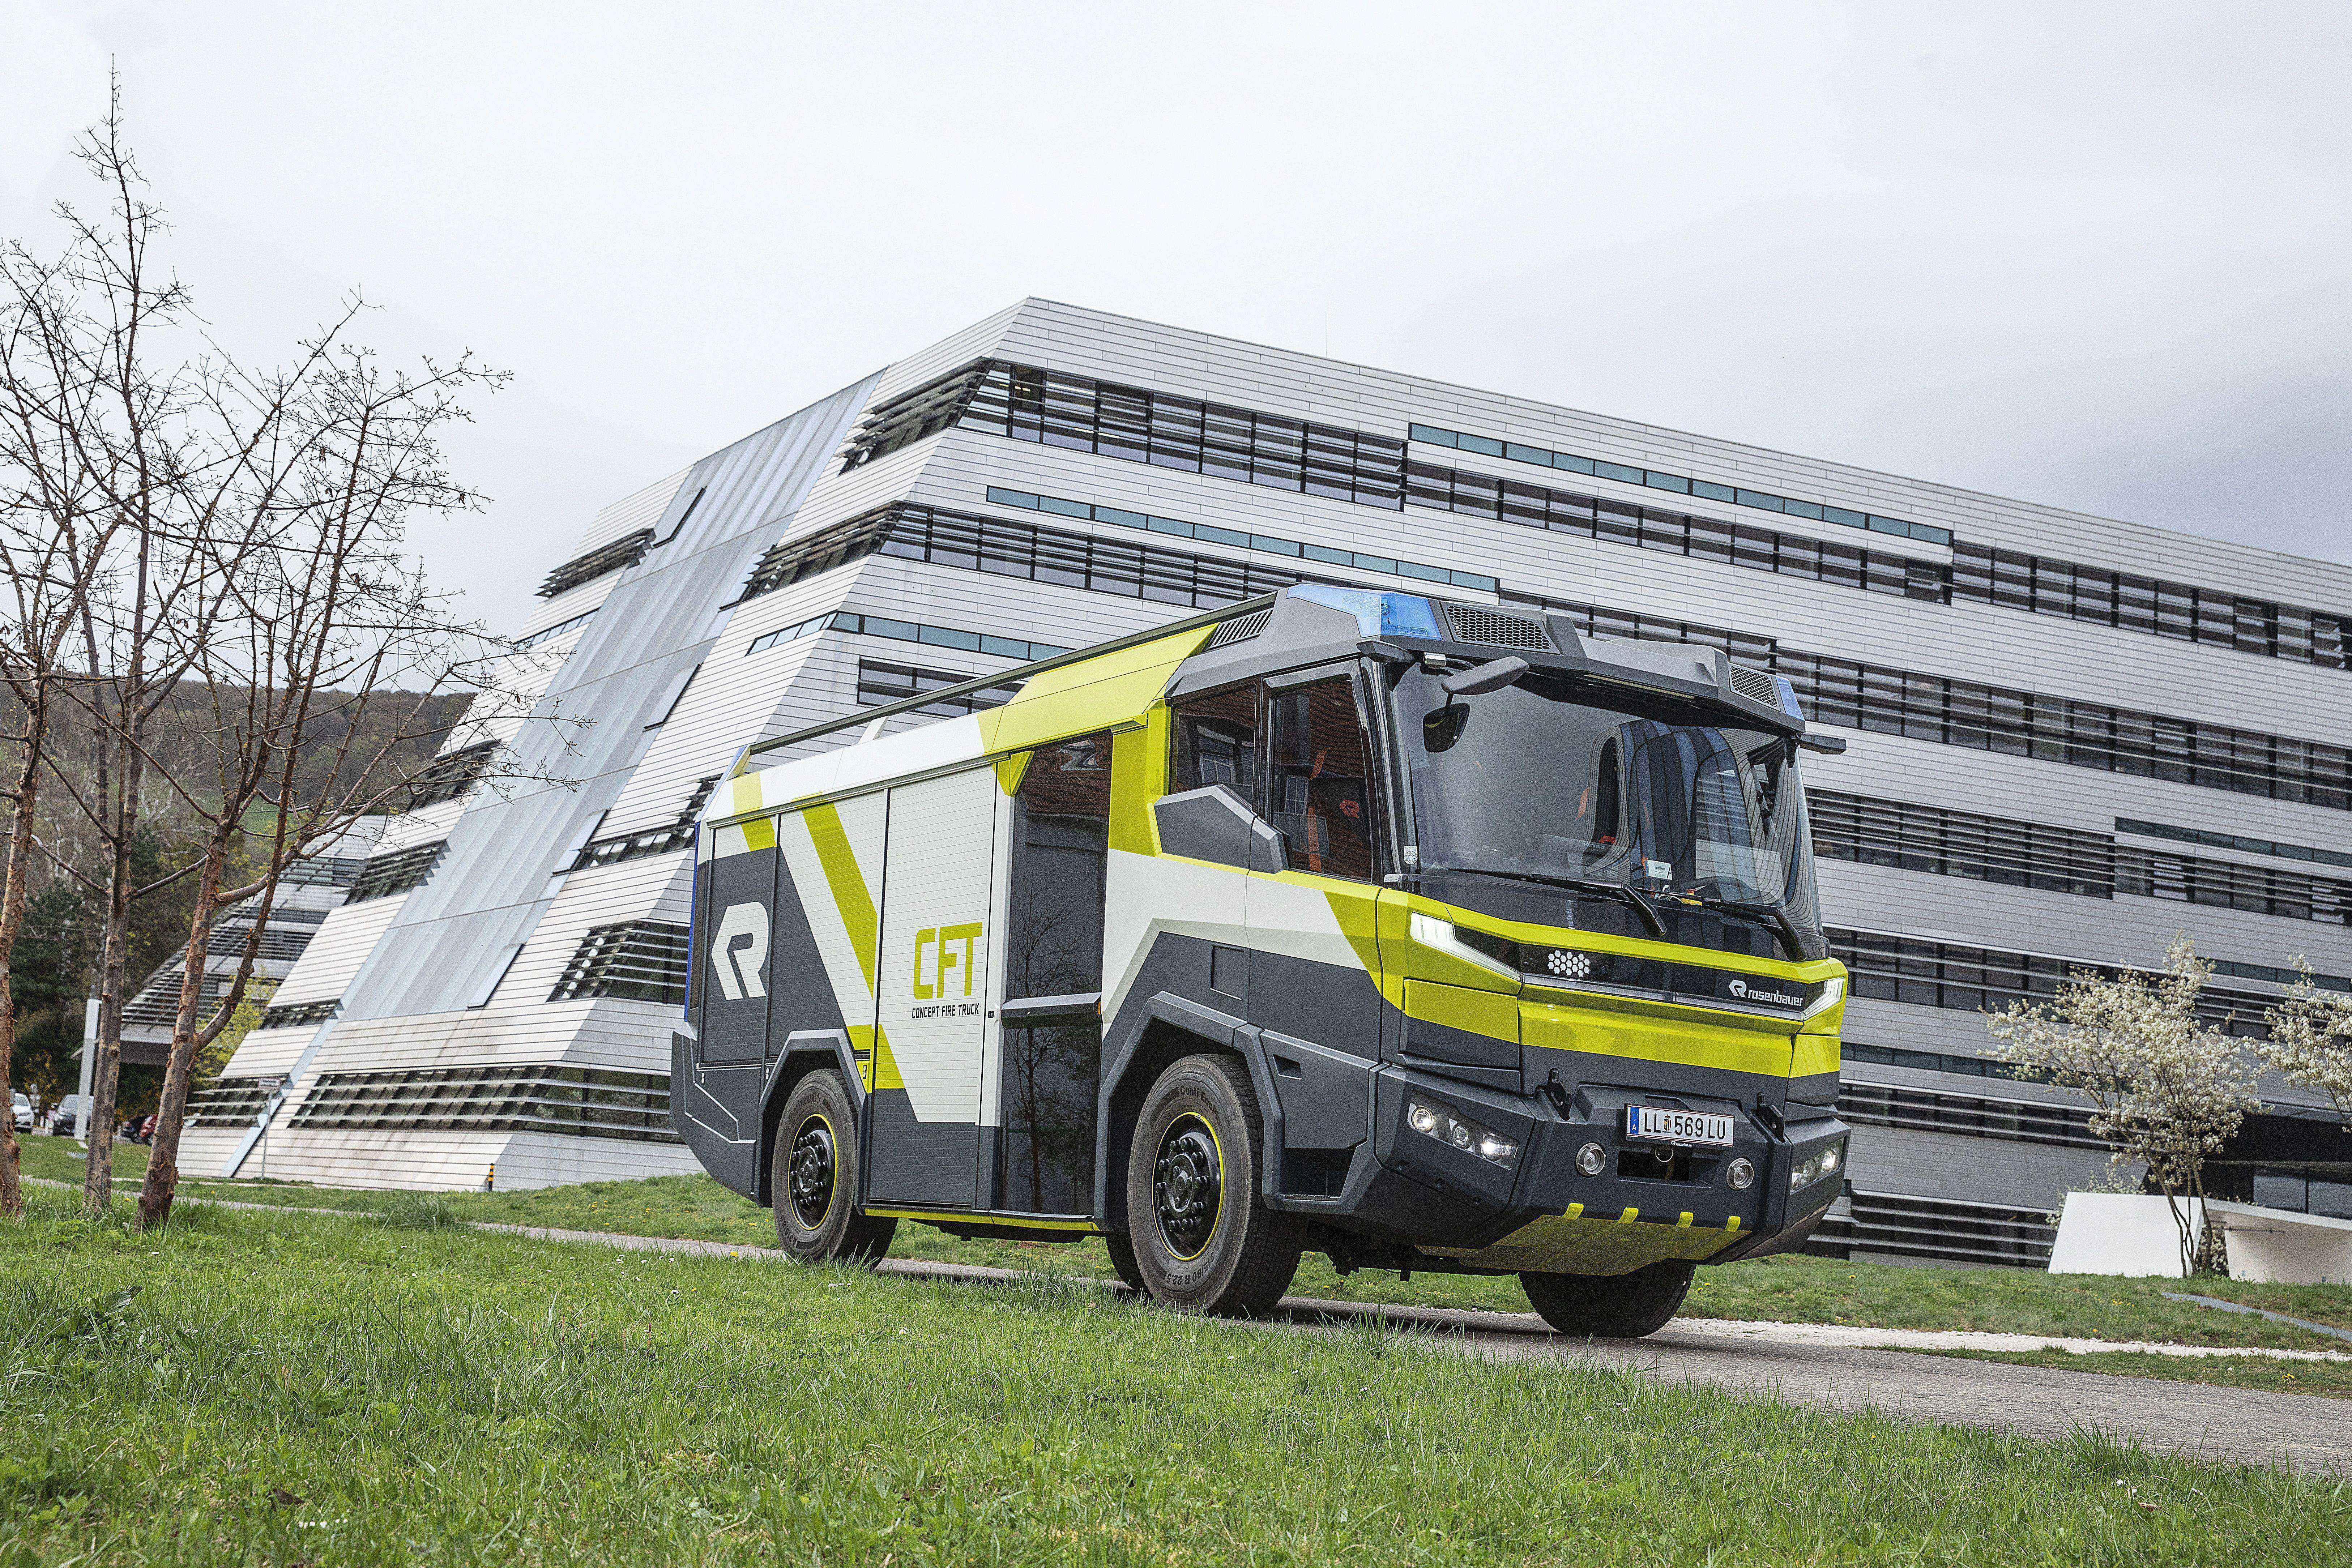 ACT set to have Australia’s first plug-in hybrid electric fire truck